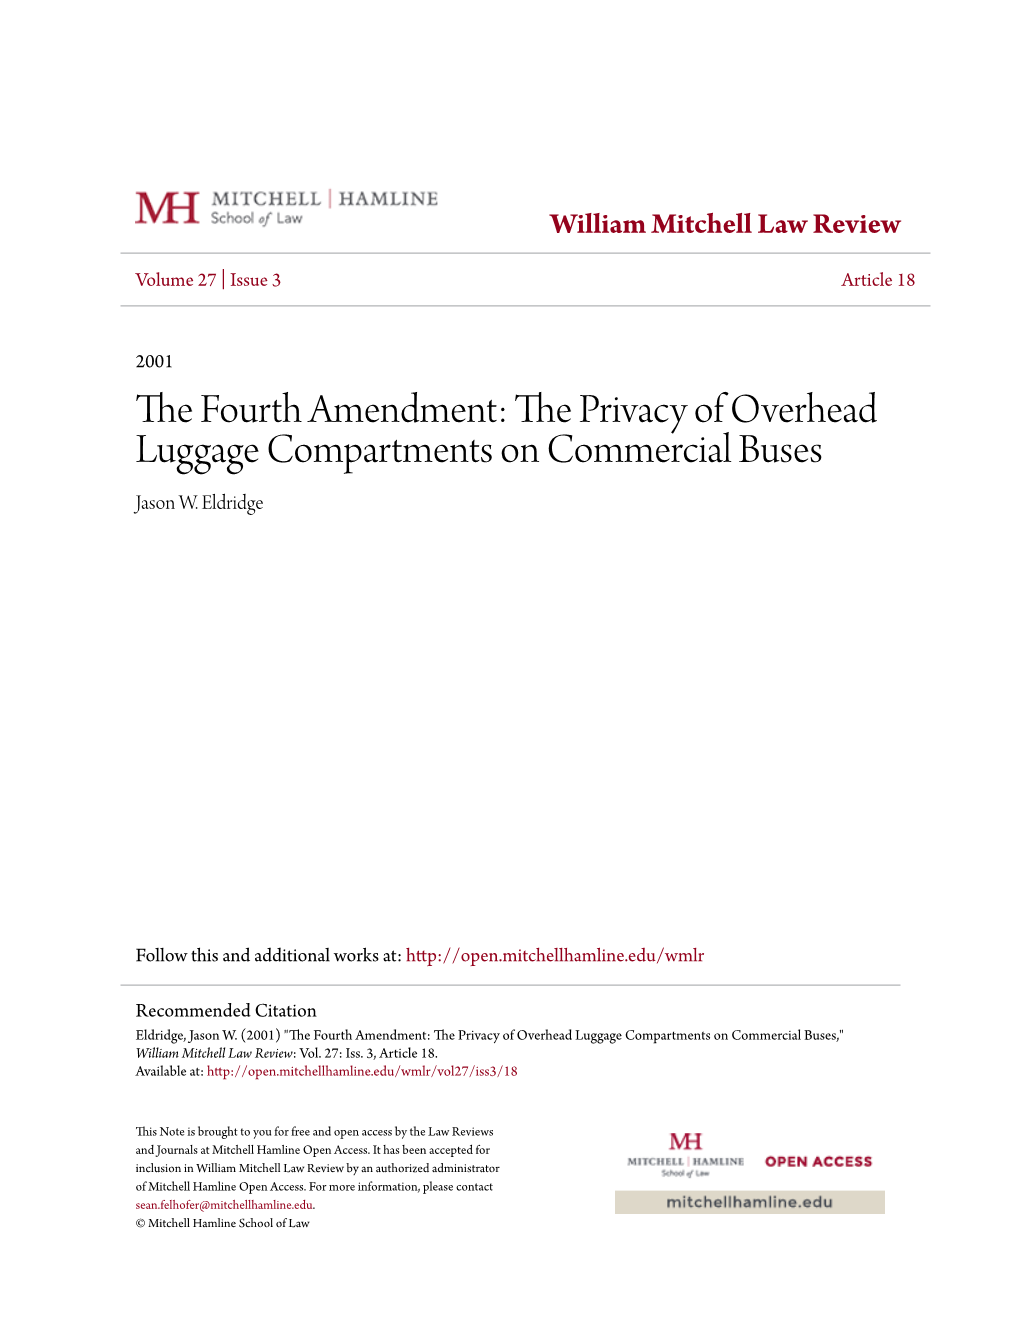 The Fourth Amendment: the Privacy of Overhead Luggage Compartment